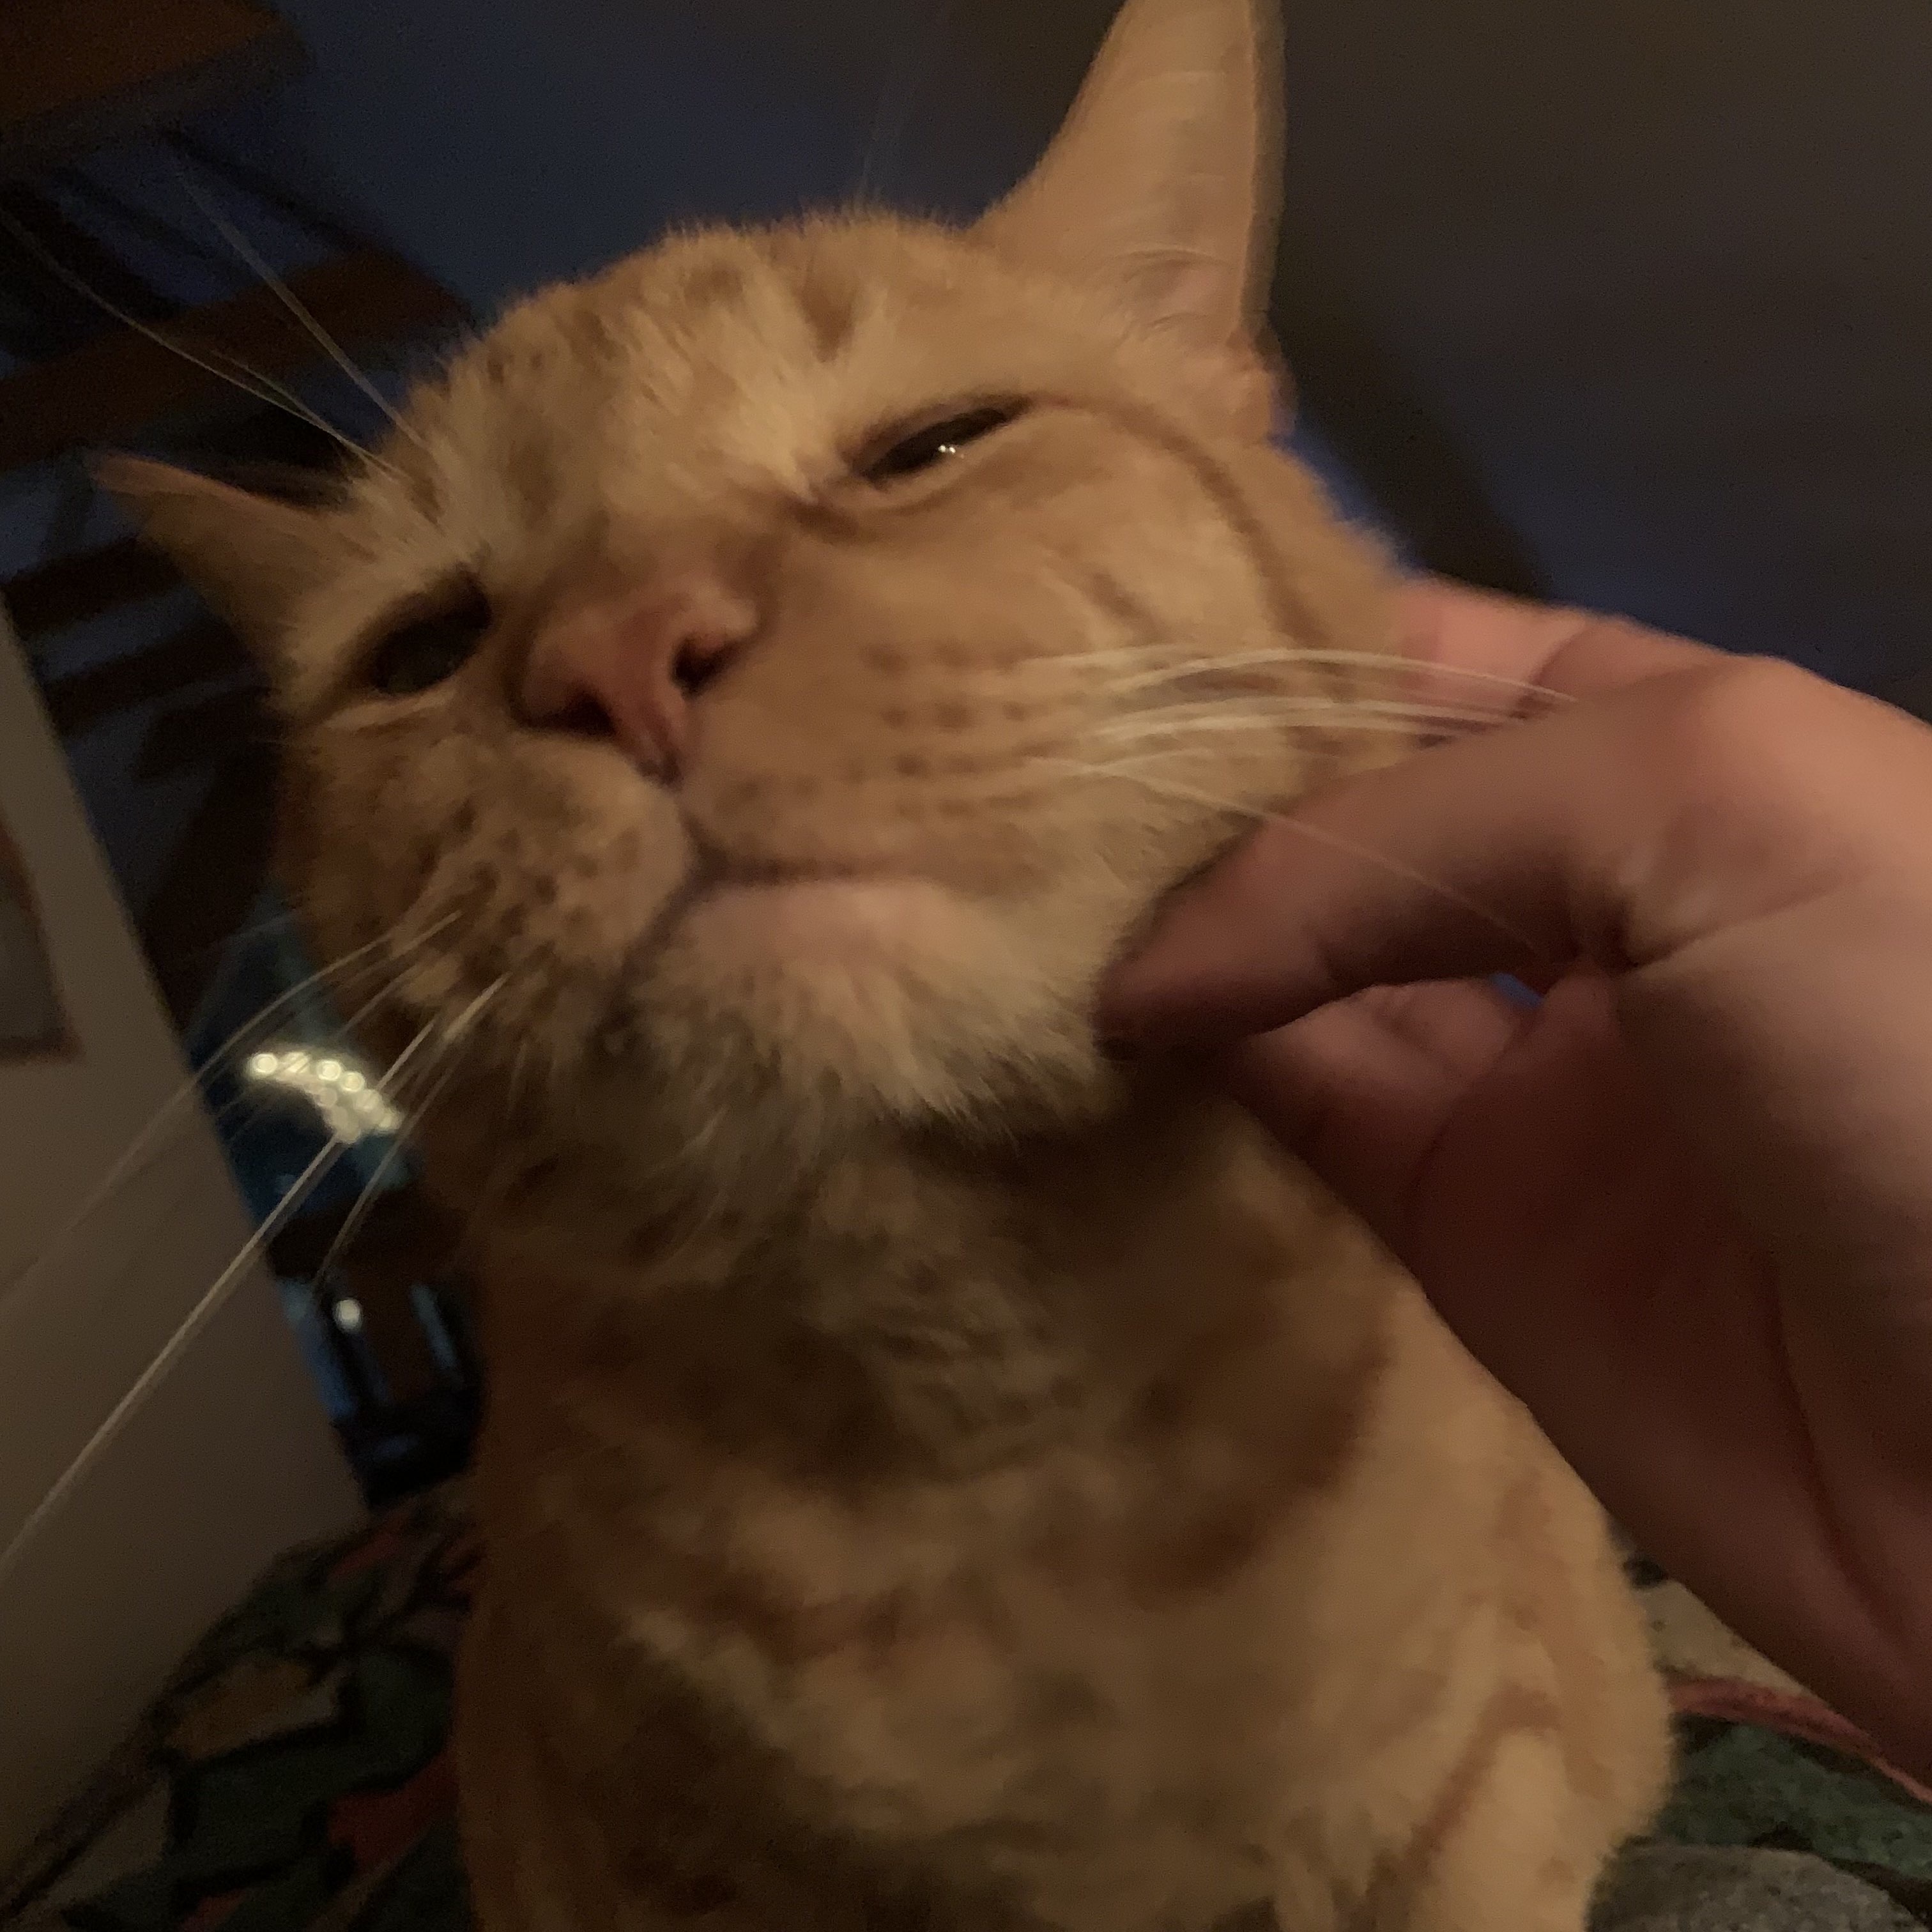 a close up picture of stanley getting his chin scratched. his eyes are closed and he looks content